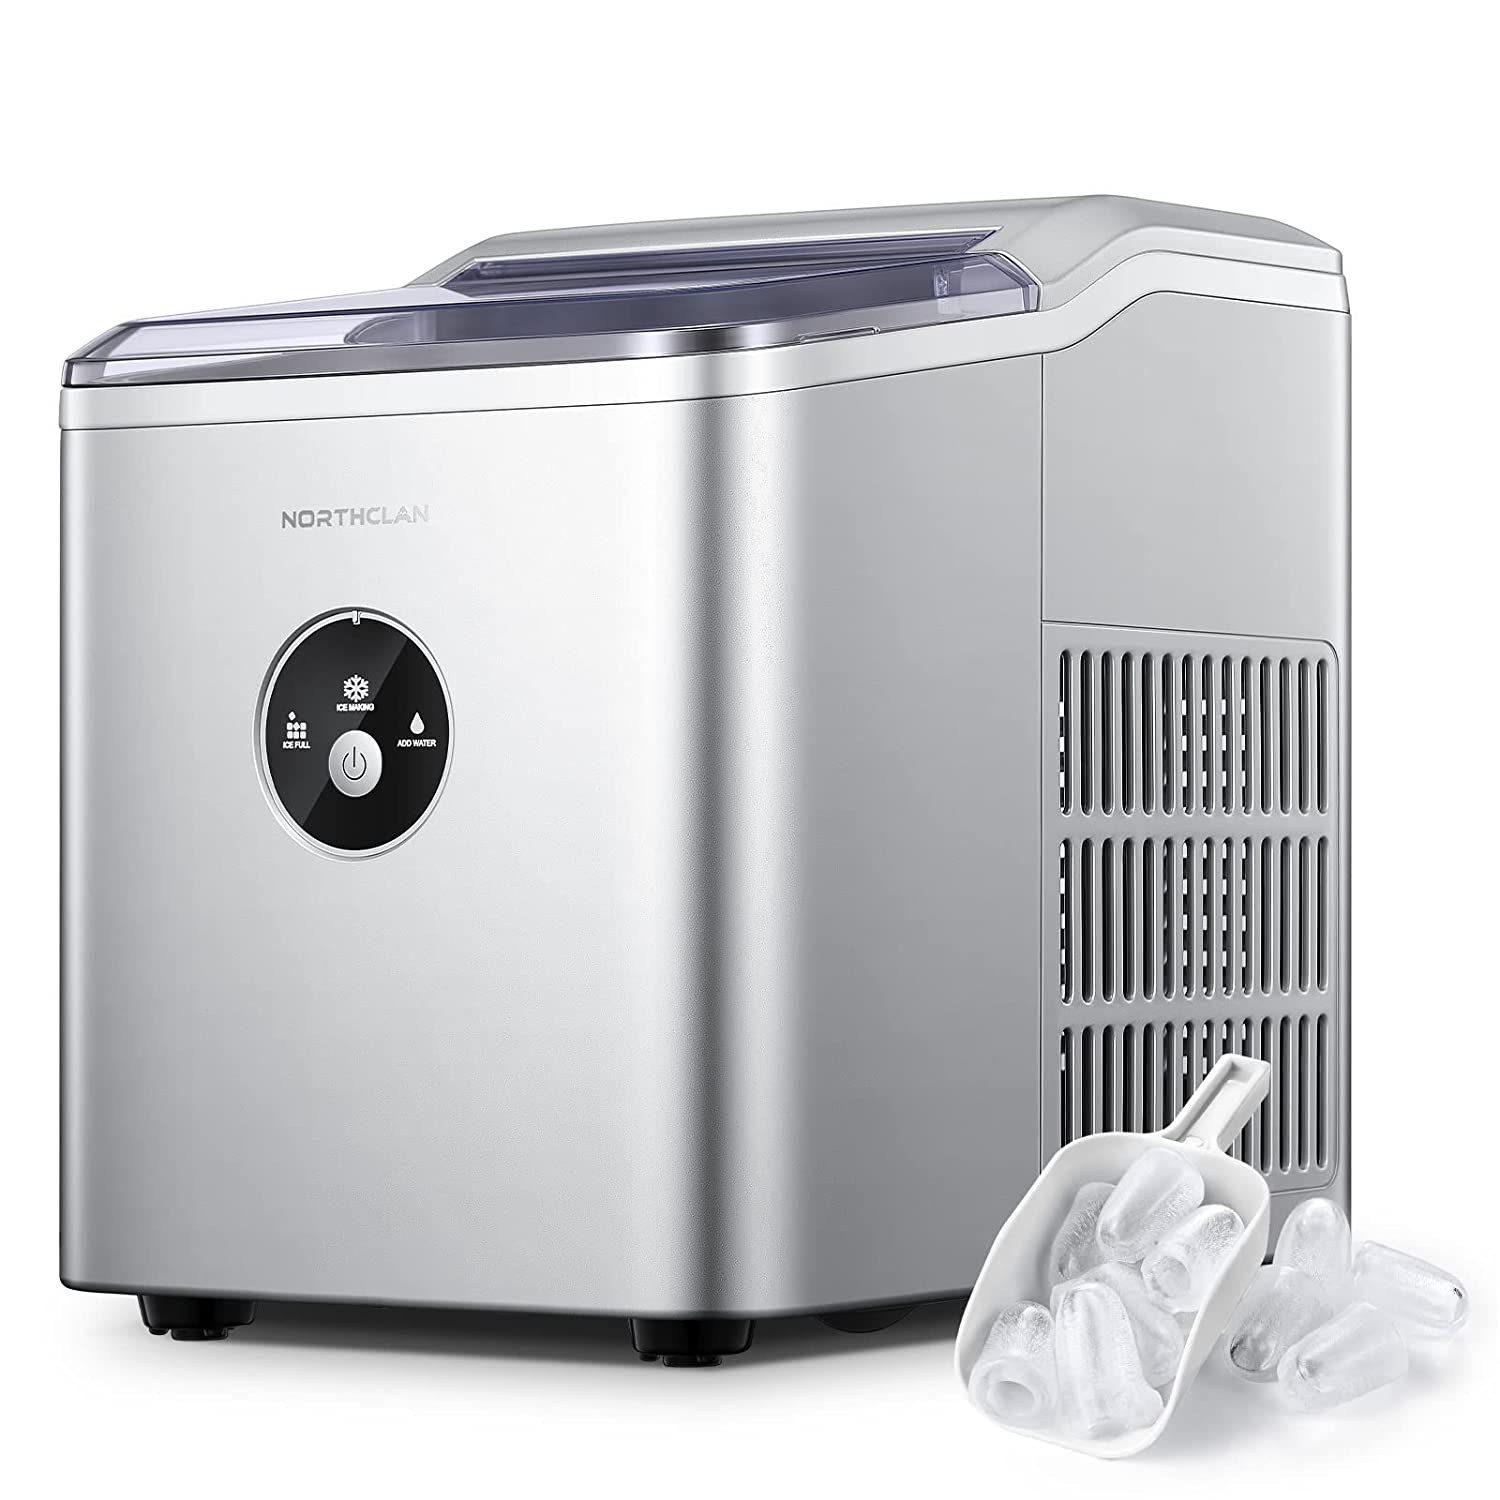 NORTHCLAN Nordclan Ice Cube Machine, 14 kg 24 Hours, 9 Ice Cubes in 6 Minutes, with LED Display and 2 L Water Tank, Ice Maker with Ice Scoop and Basket, Ice Cube Maker for Party, Office, Bar, Motorhome,